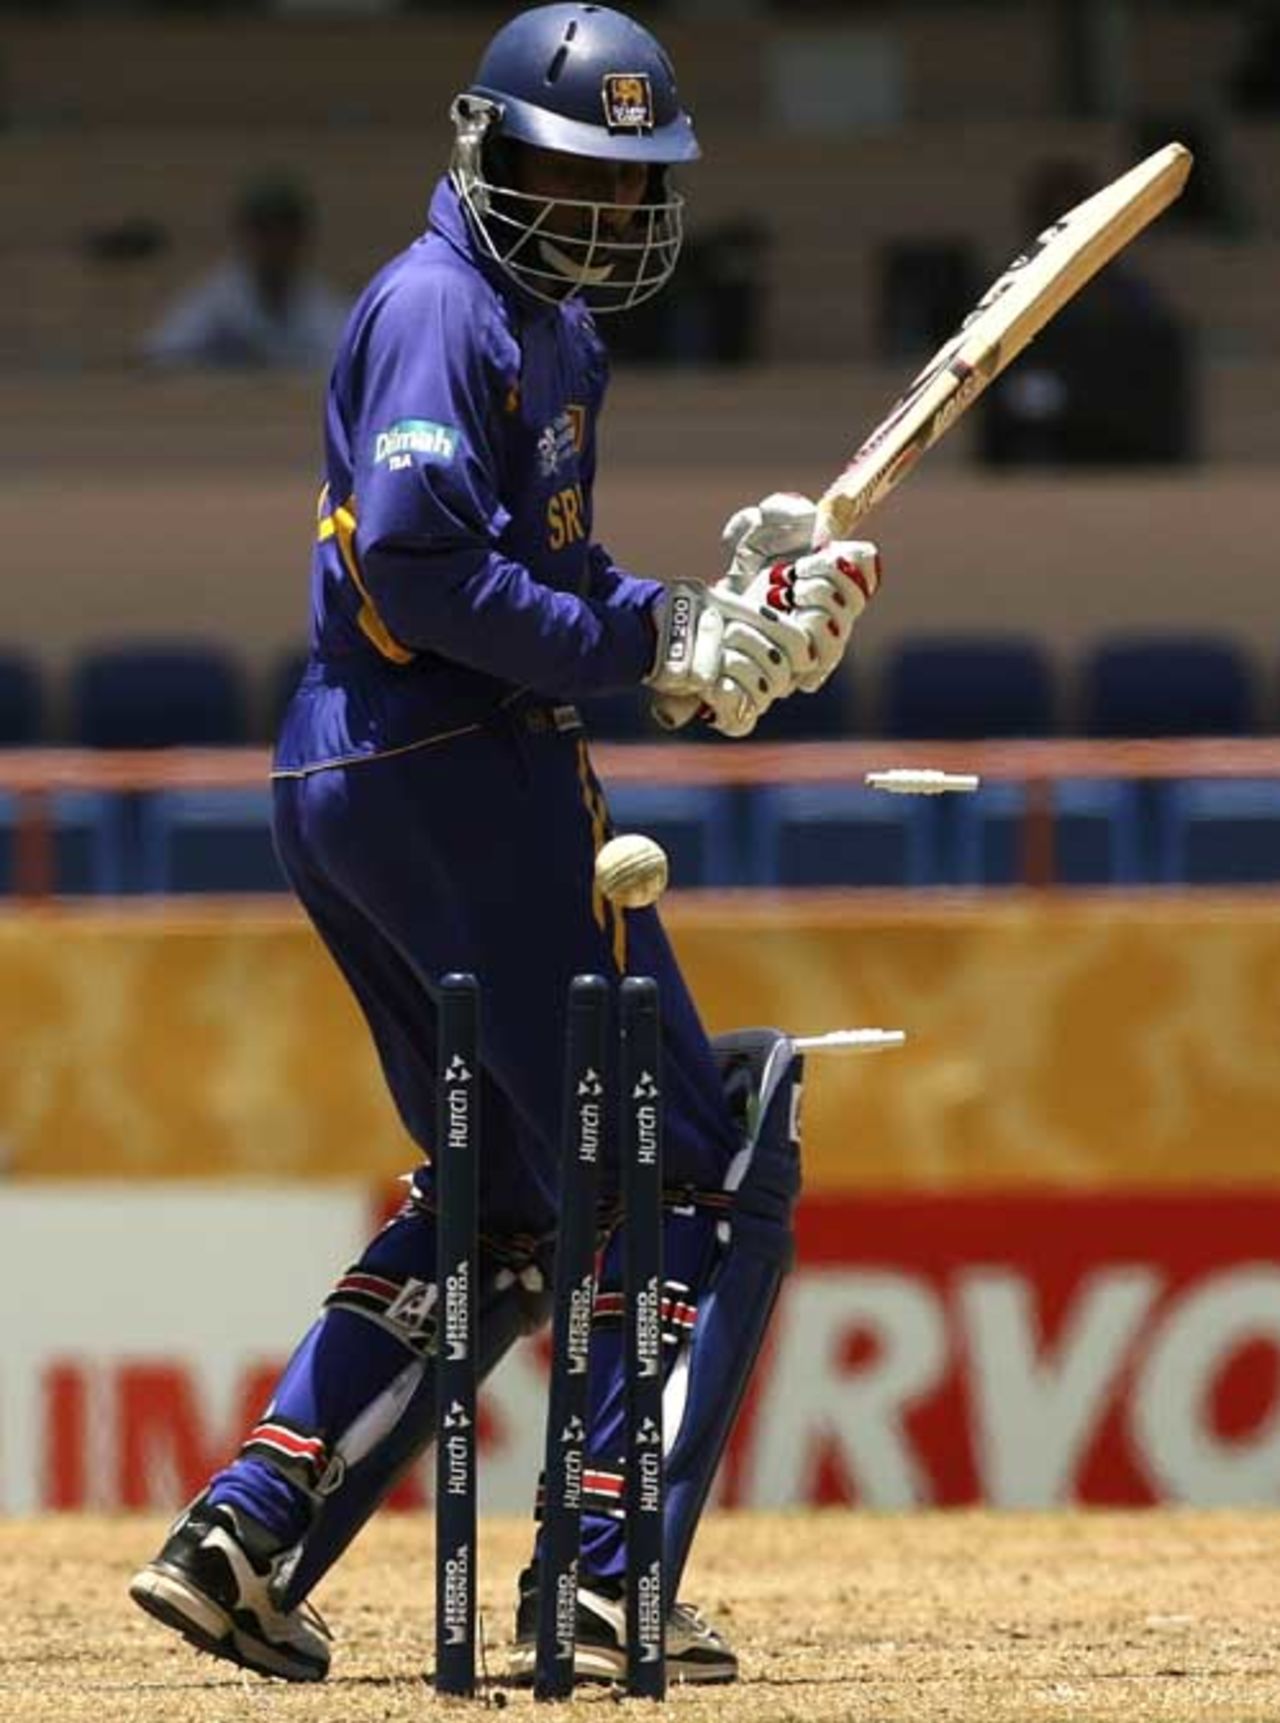 Russell Arnold swings, misses and is cleaned up by Shaun Tait, Australia v Sri Lanka, Super Eights, Grenada, April 16, 2007